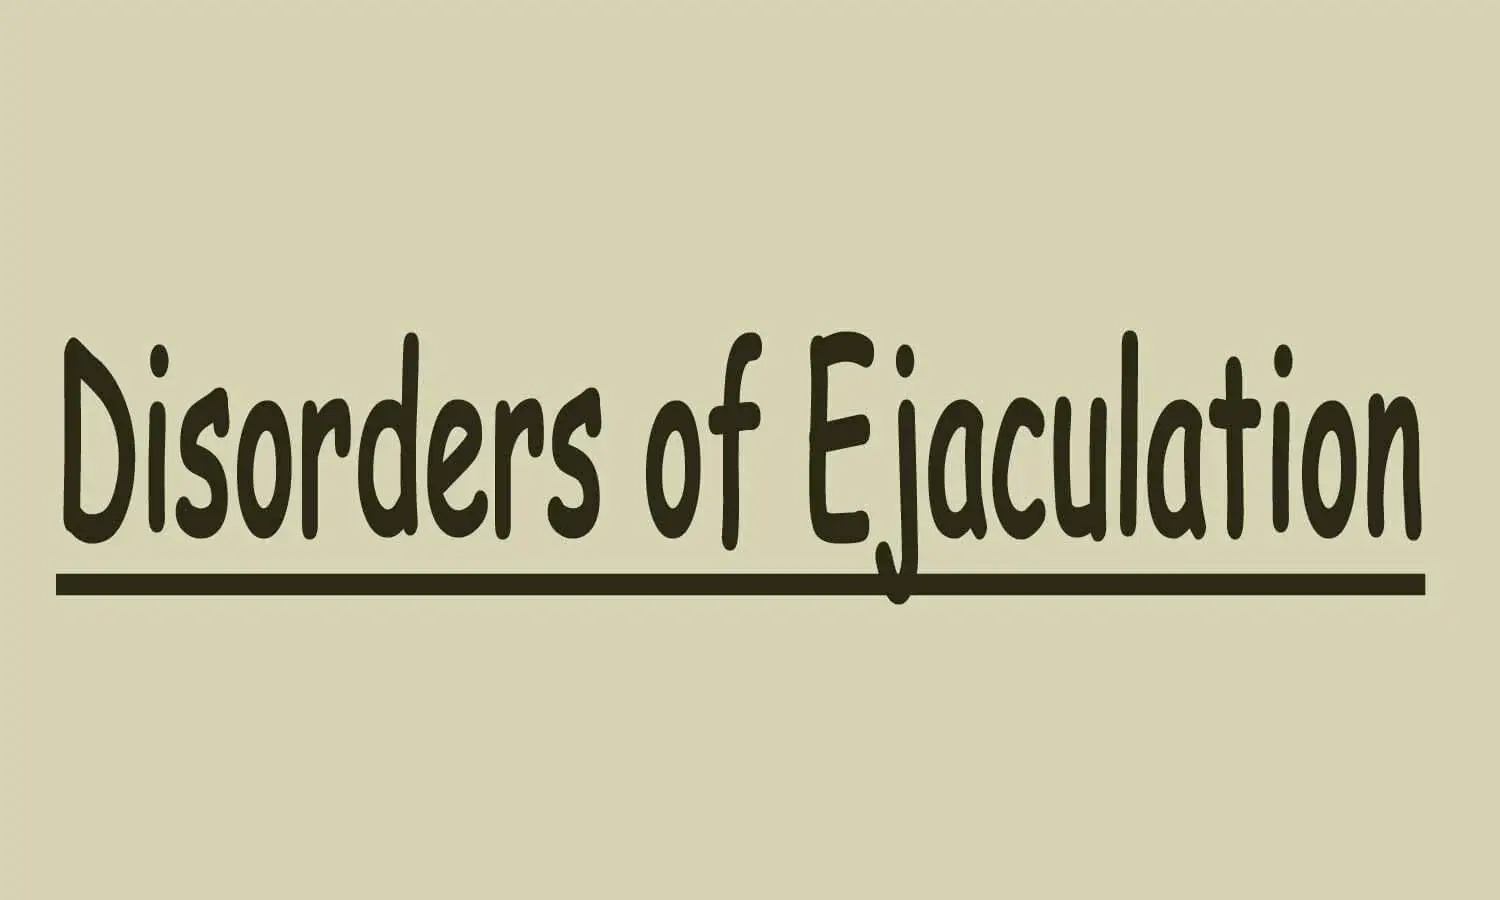 Disorders of Ejaculation